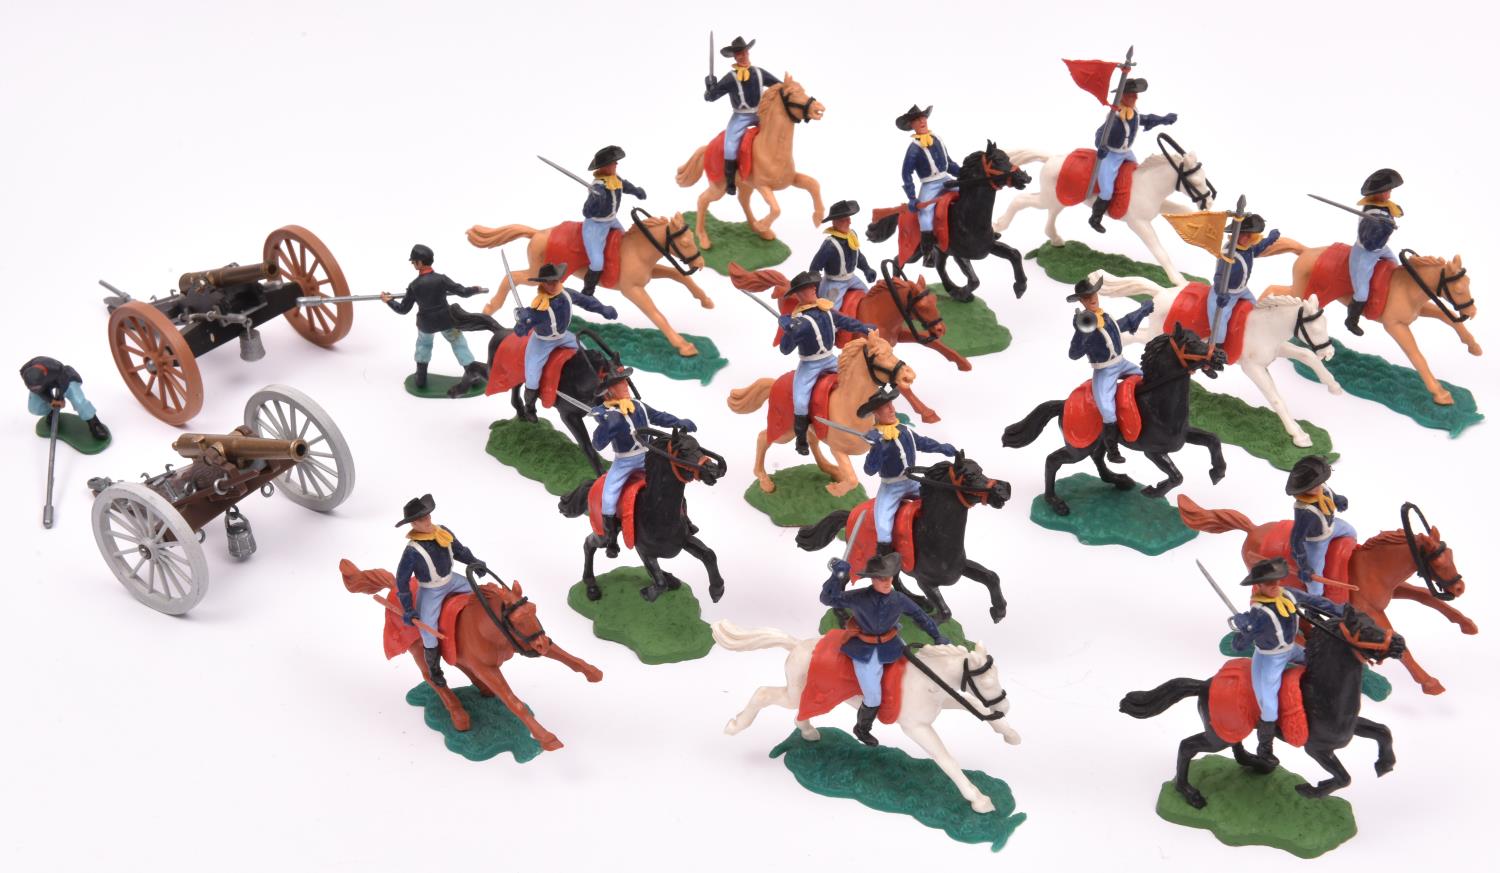 16 Timpo Civil War figures. Mounted soldiers on mixed light brown, dark brown and white horses on